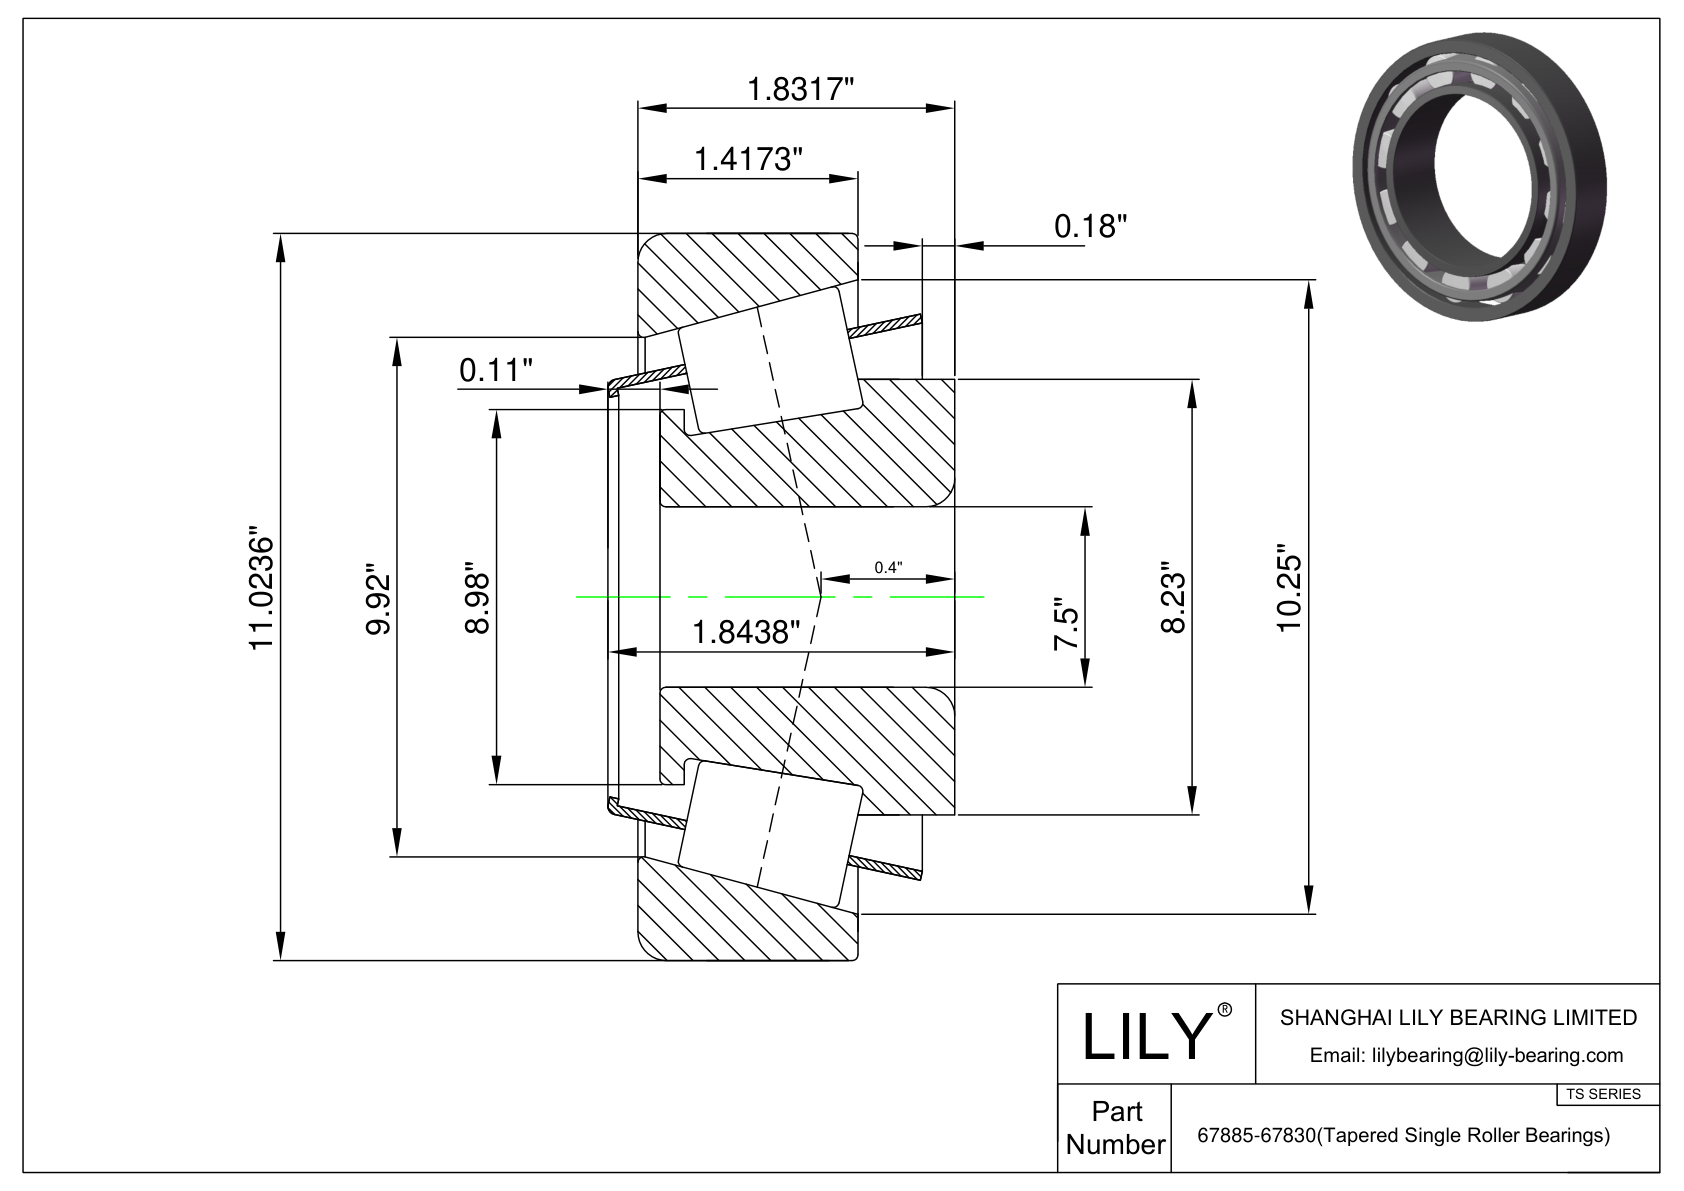 67885-67830 TS (Tapered Single Roller Bearings) (Imperial) cad drawing